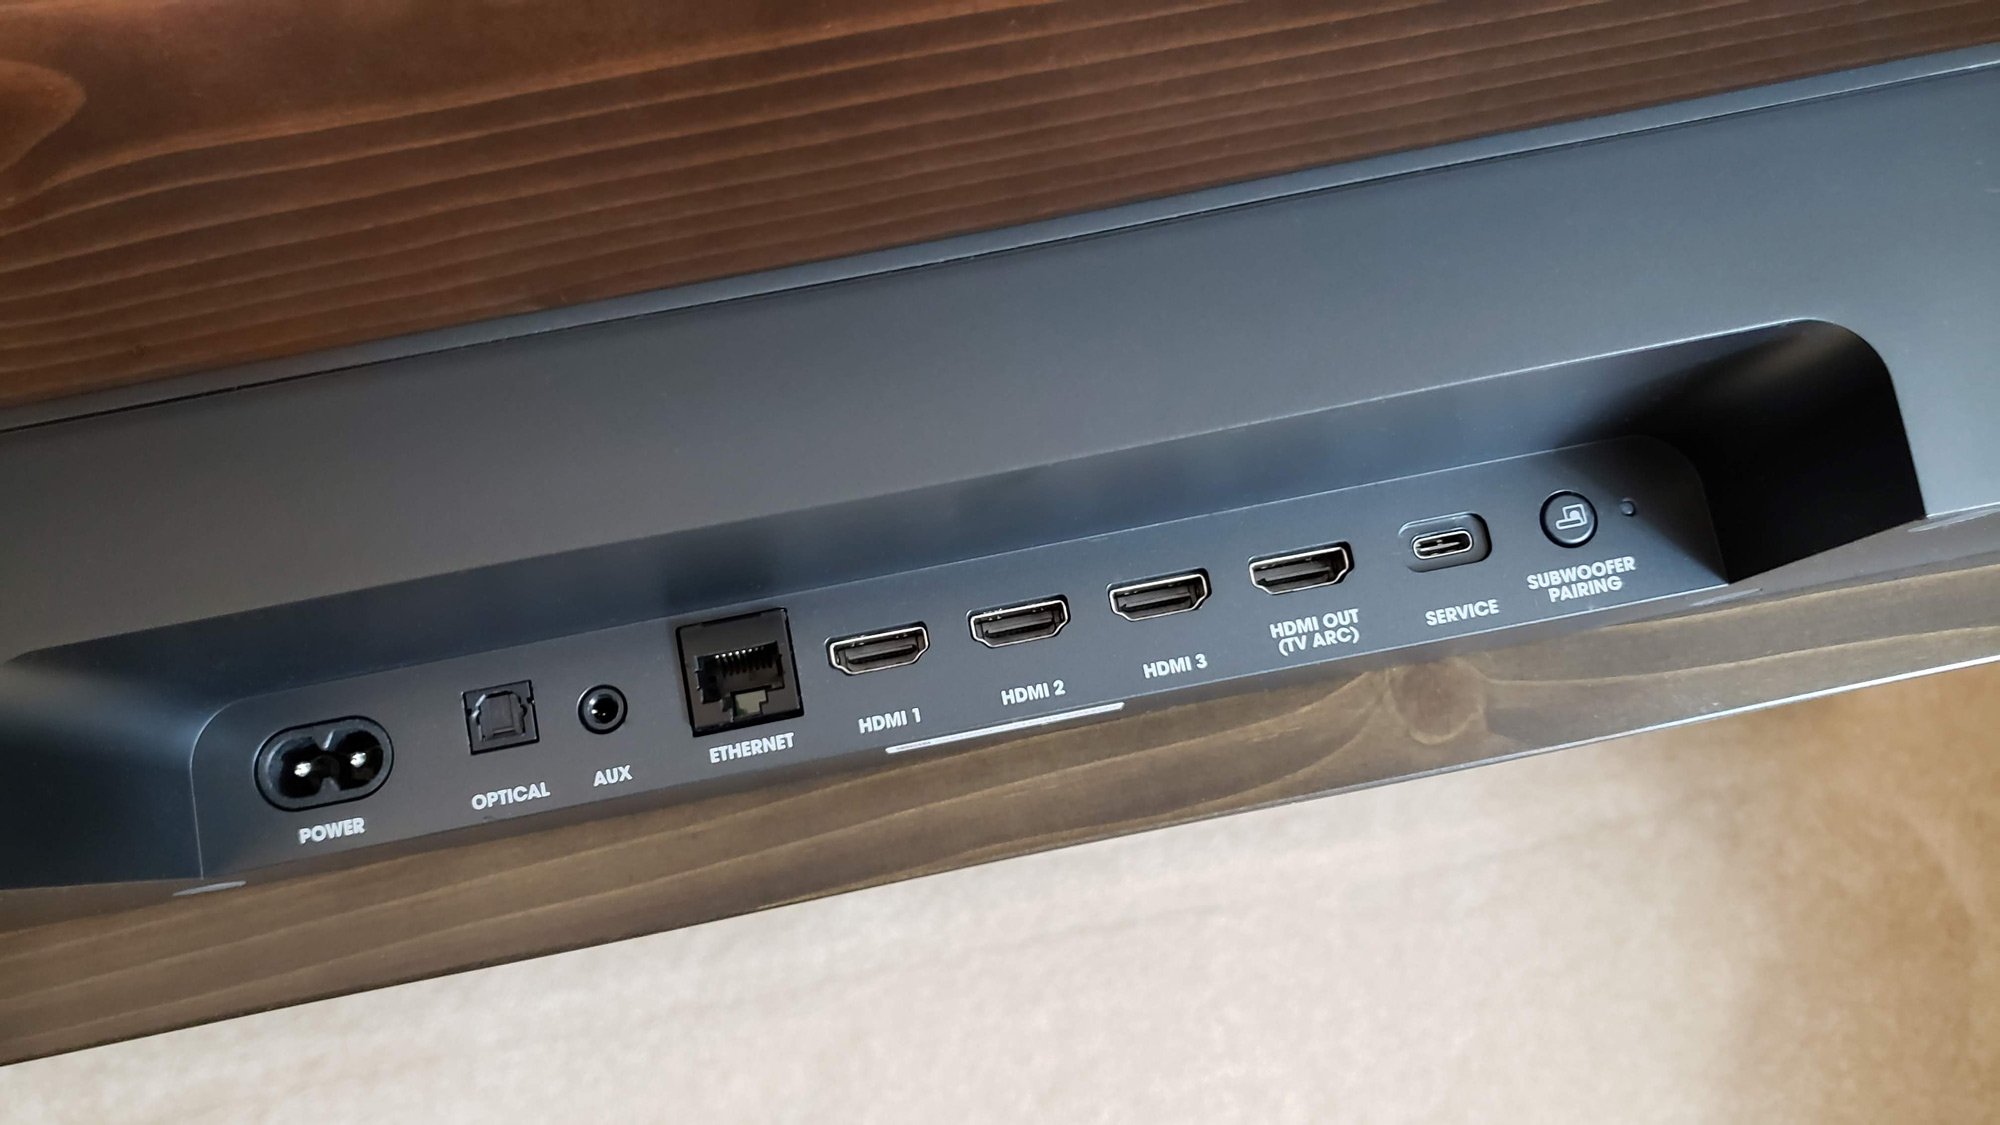 How To Connect My Sound Bar To The Cable One Cable Box Or To TV?